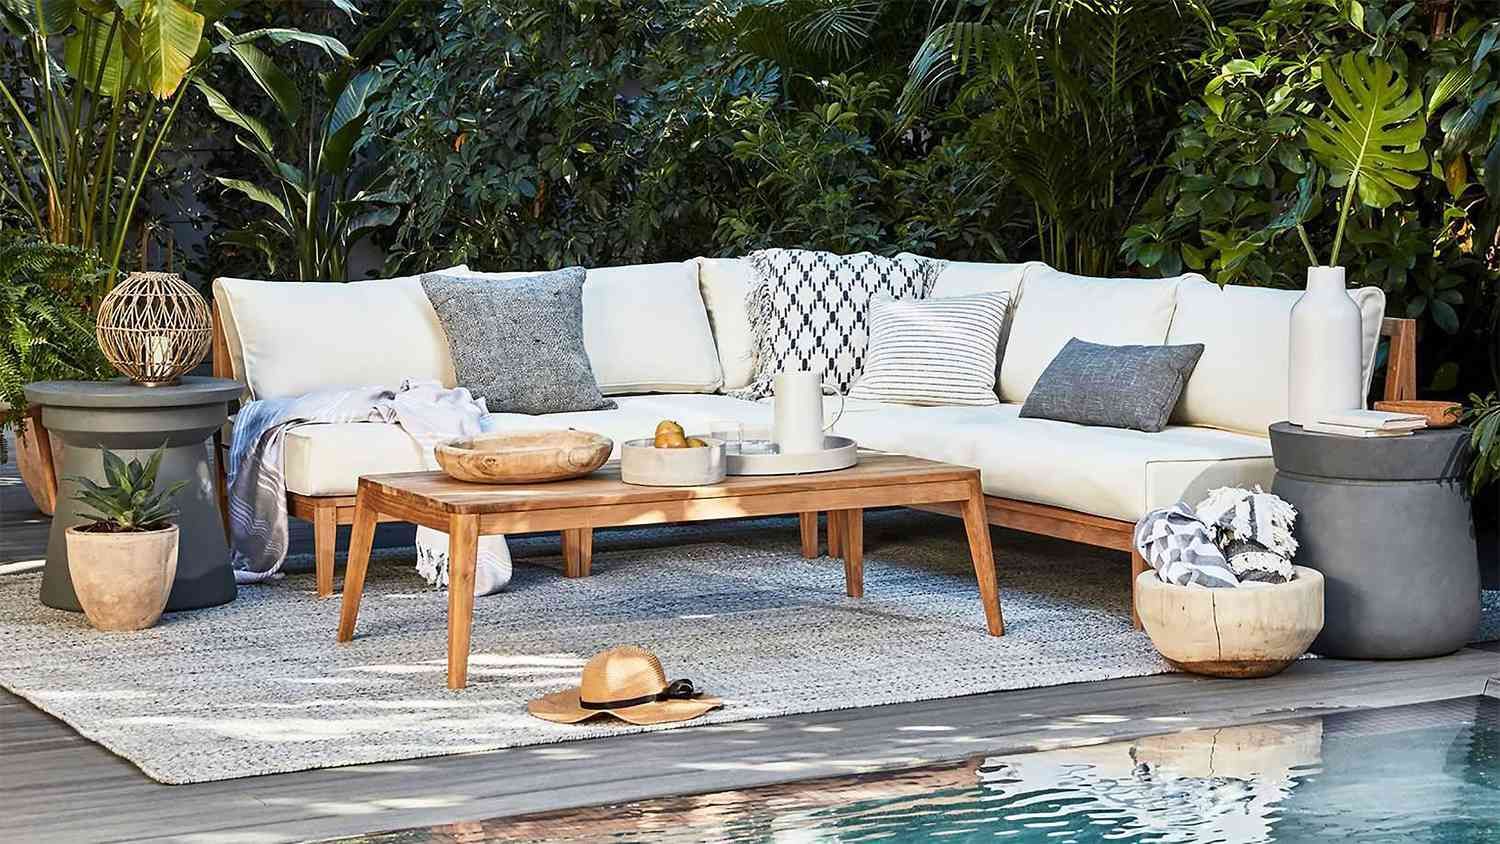 Outer's Outdoor Sectional Is More Comfortable Than My Indoor Couch With Regard To Outdoor Couch Cushions, Throw Pillows And Slat Coffee Table (Photo 1 of 15)